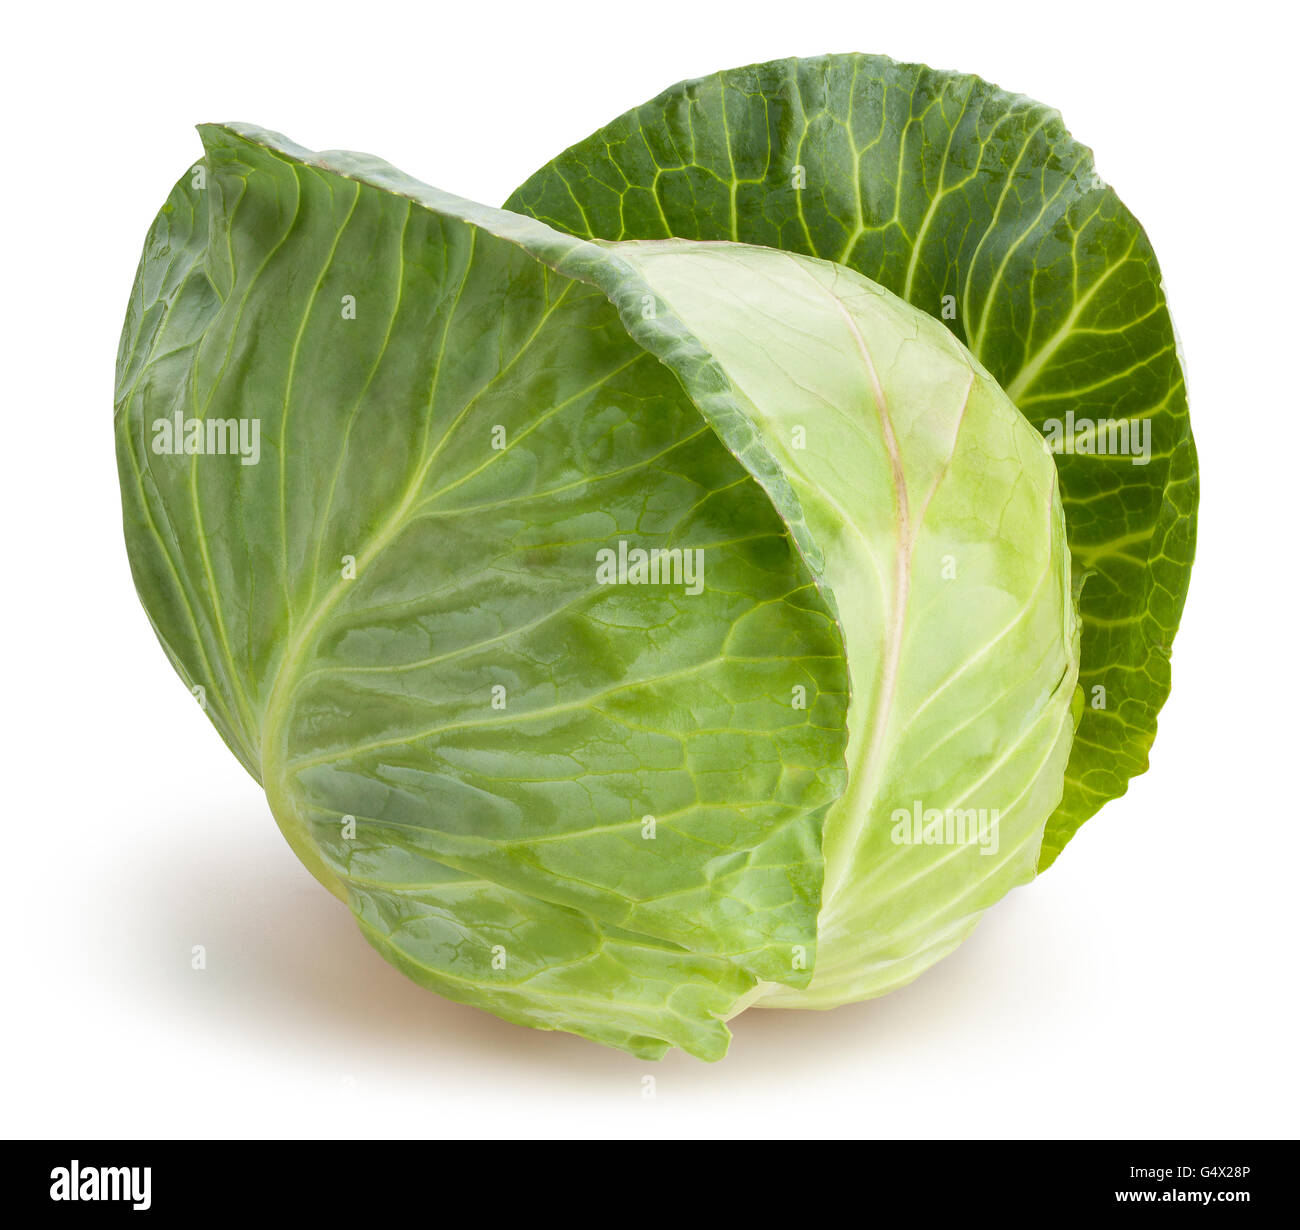 cabbage isolated Stock Photo